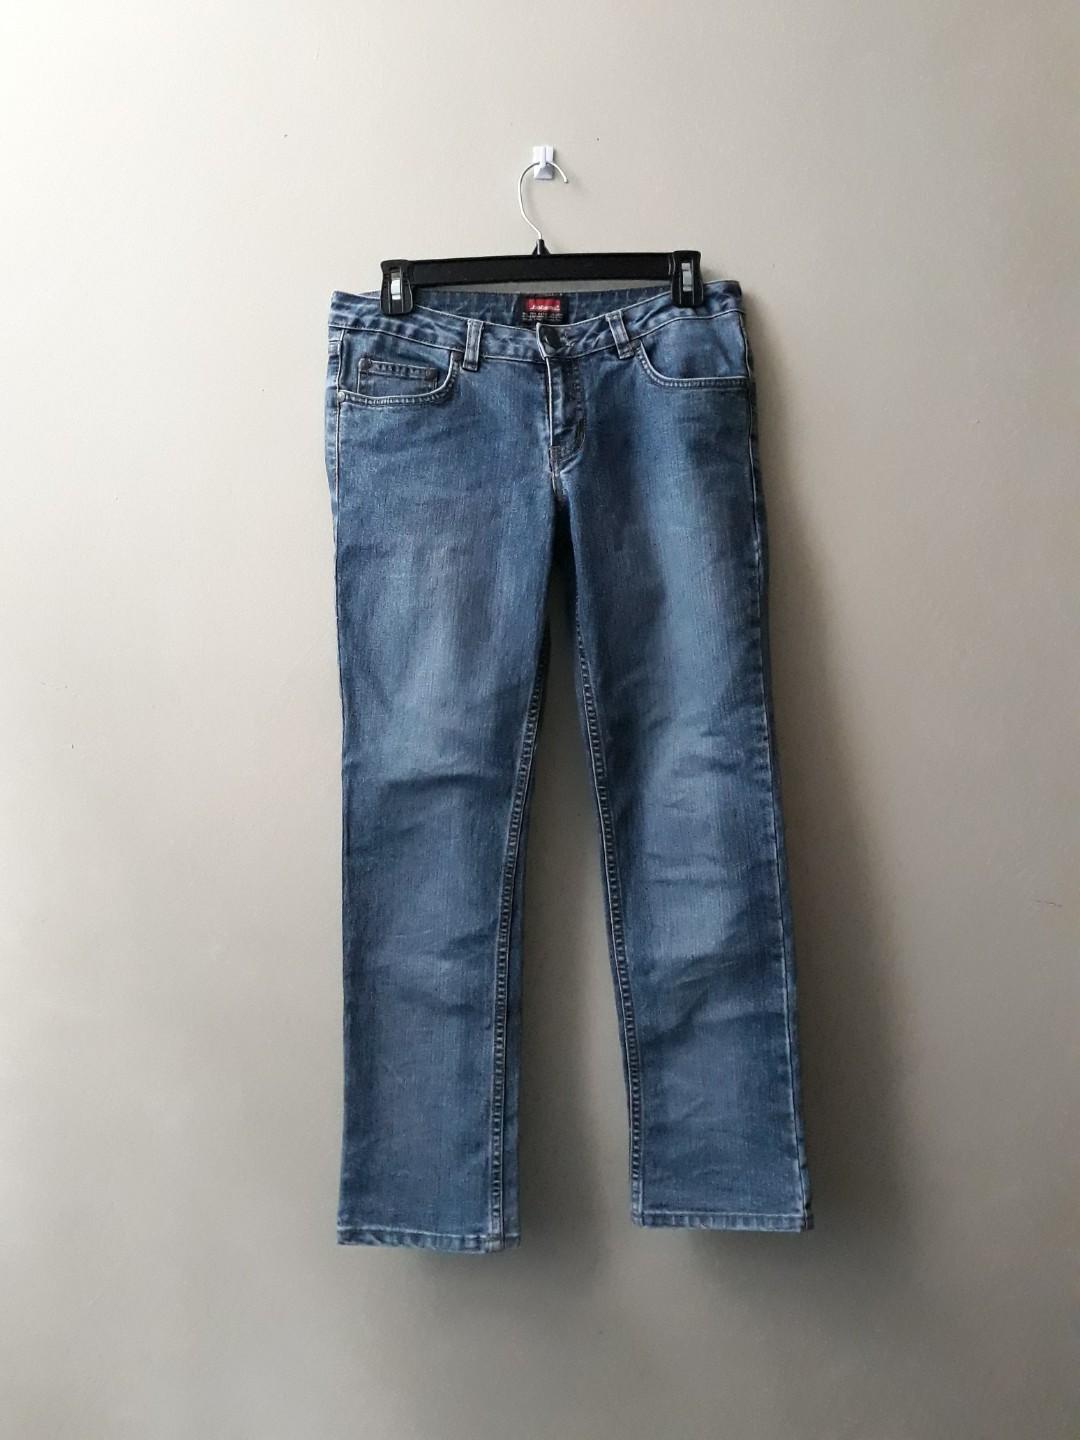 bobson jeans price